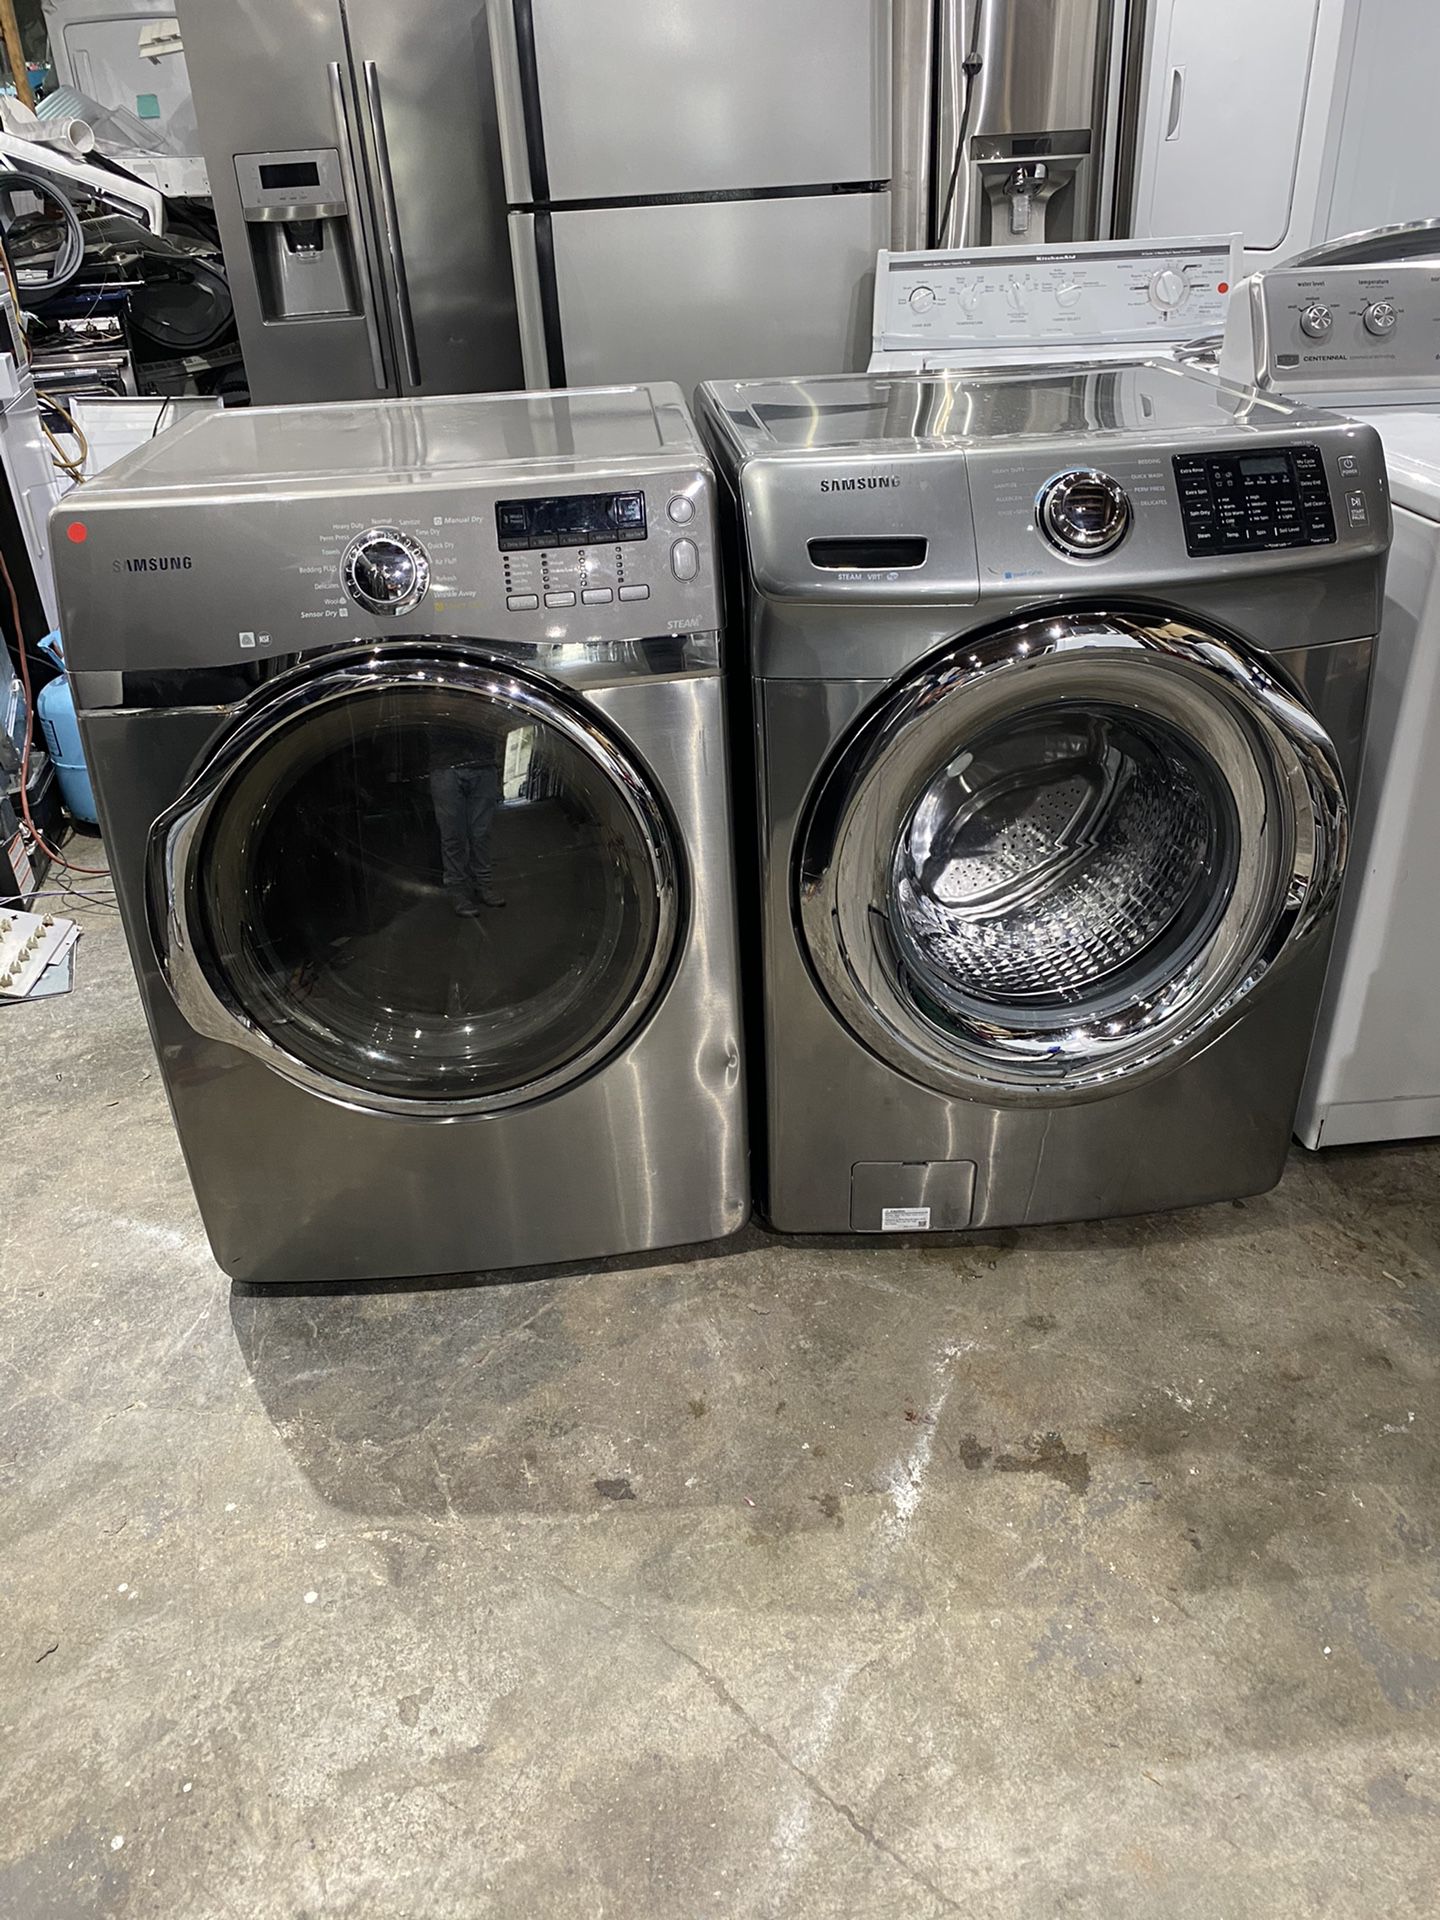 Samsung washer and dryer electric steam heavy duty stainless steel works perfect clean one receipt for 60 days warranty